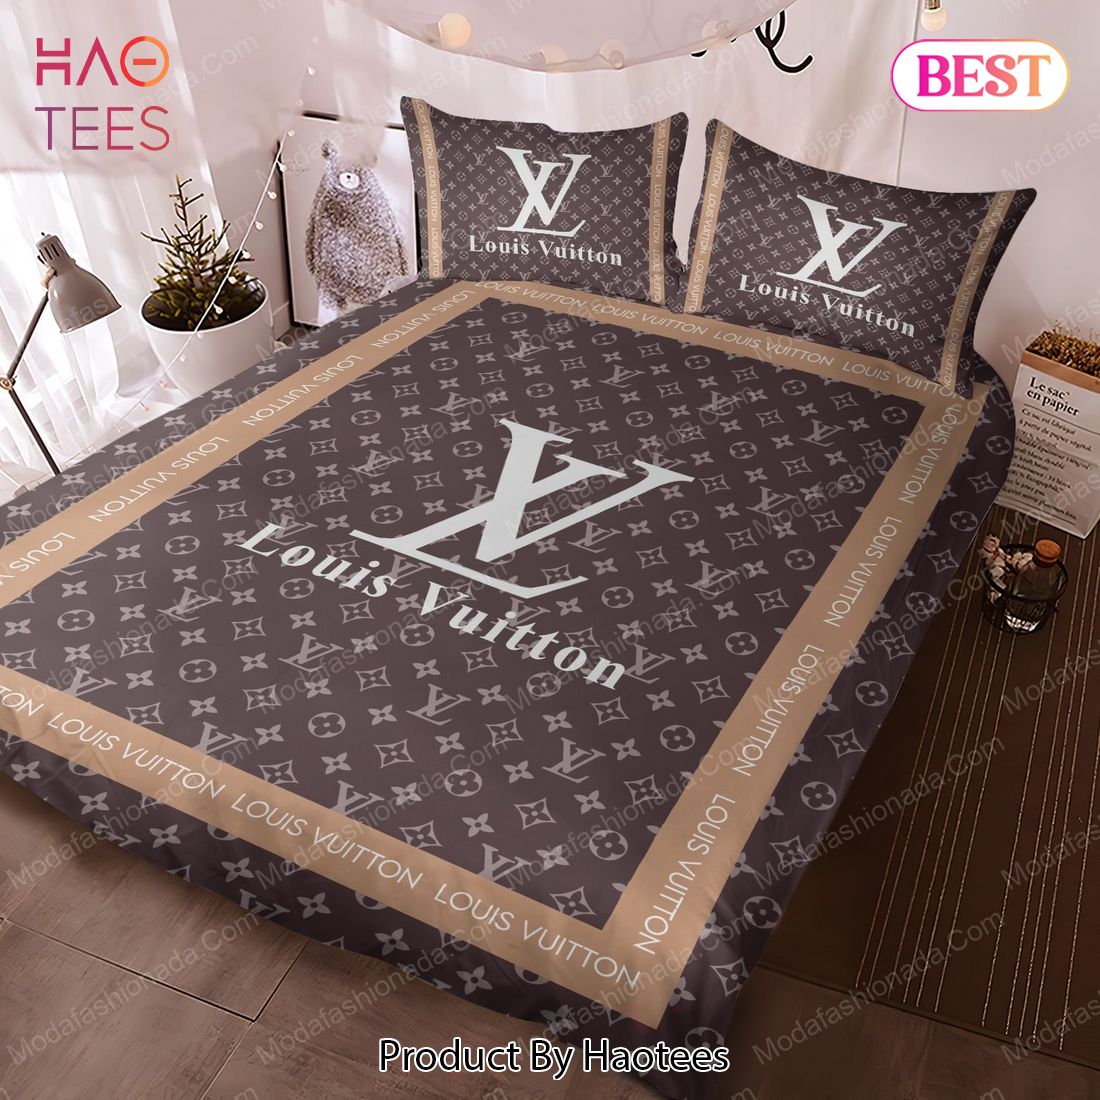 Incredible Louis Vuitton Lv Logo Luxury Fashion Brand Bedding Sets Bed Linen  Bedclothes Bedroom Comforter Home Decor Duvet Covers Hypebeast Bedspread, by Nadaxaxora